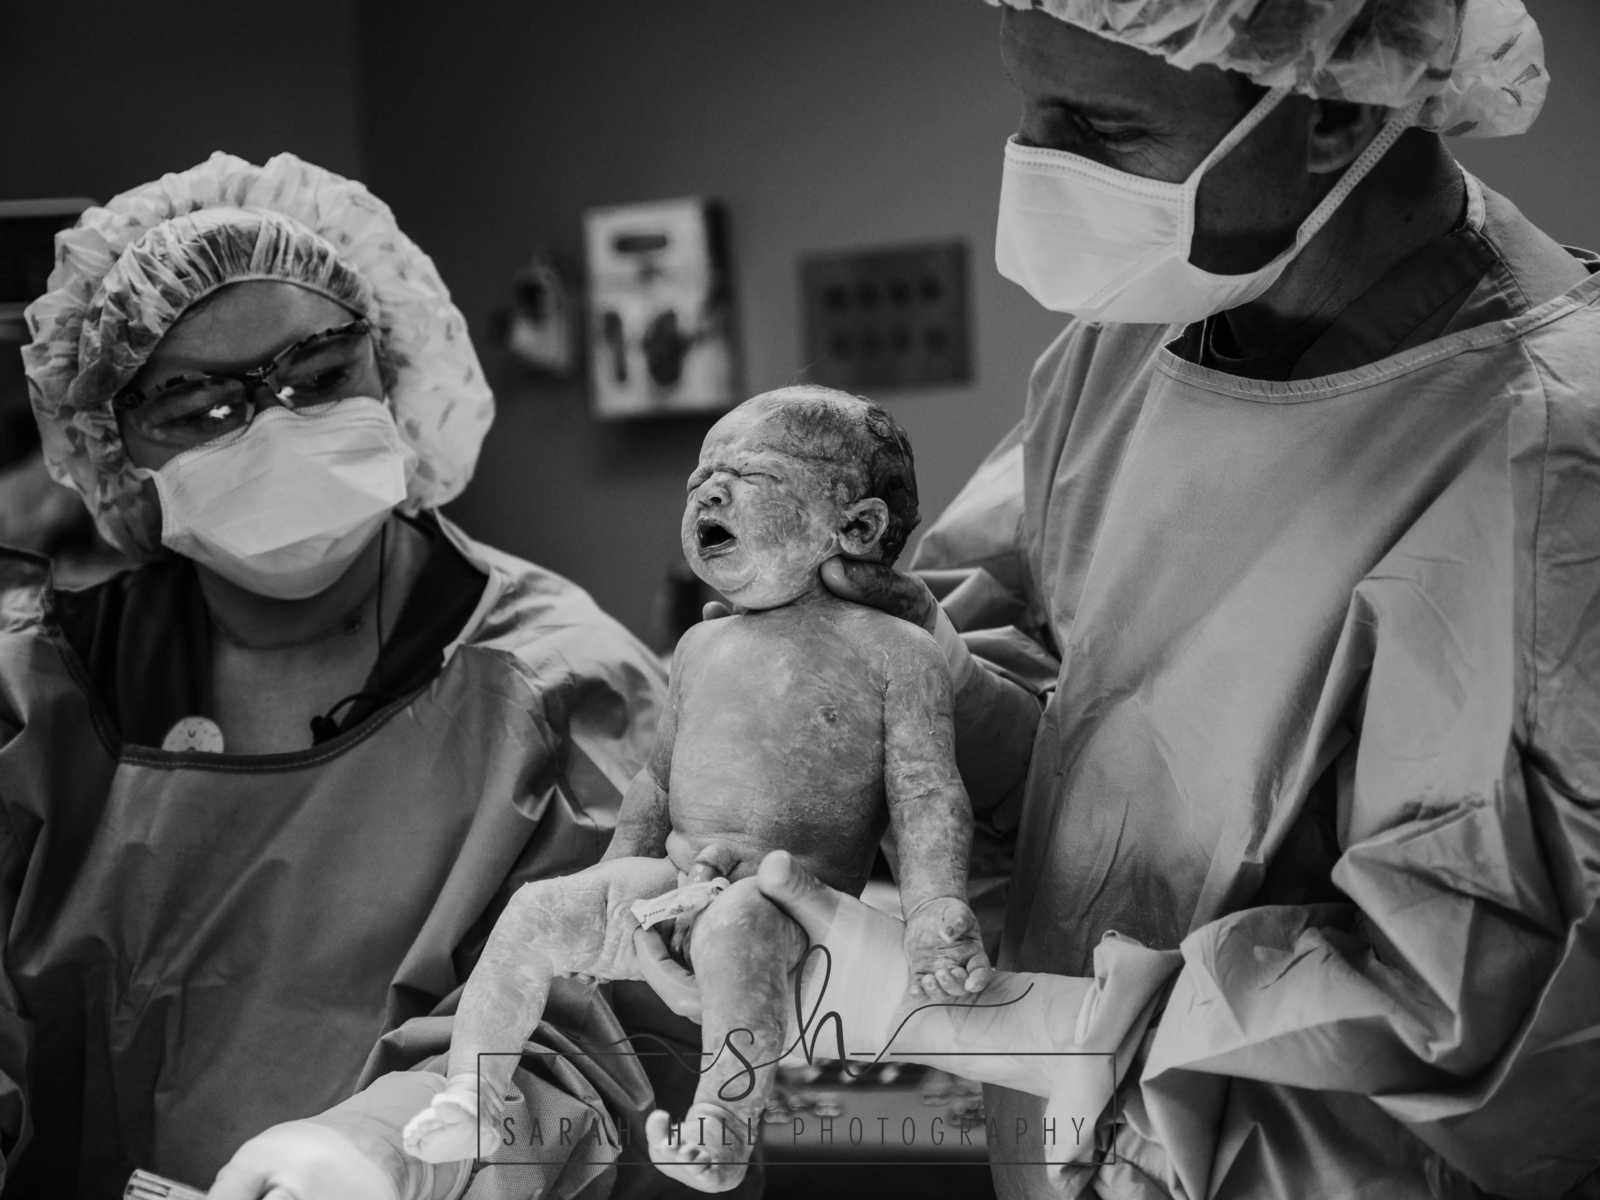 OBGYN holding c-section baby while nurse watches